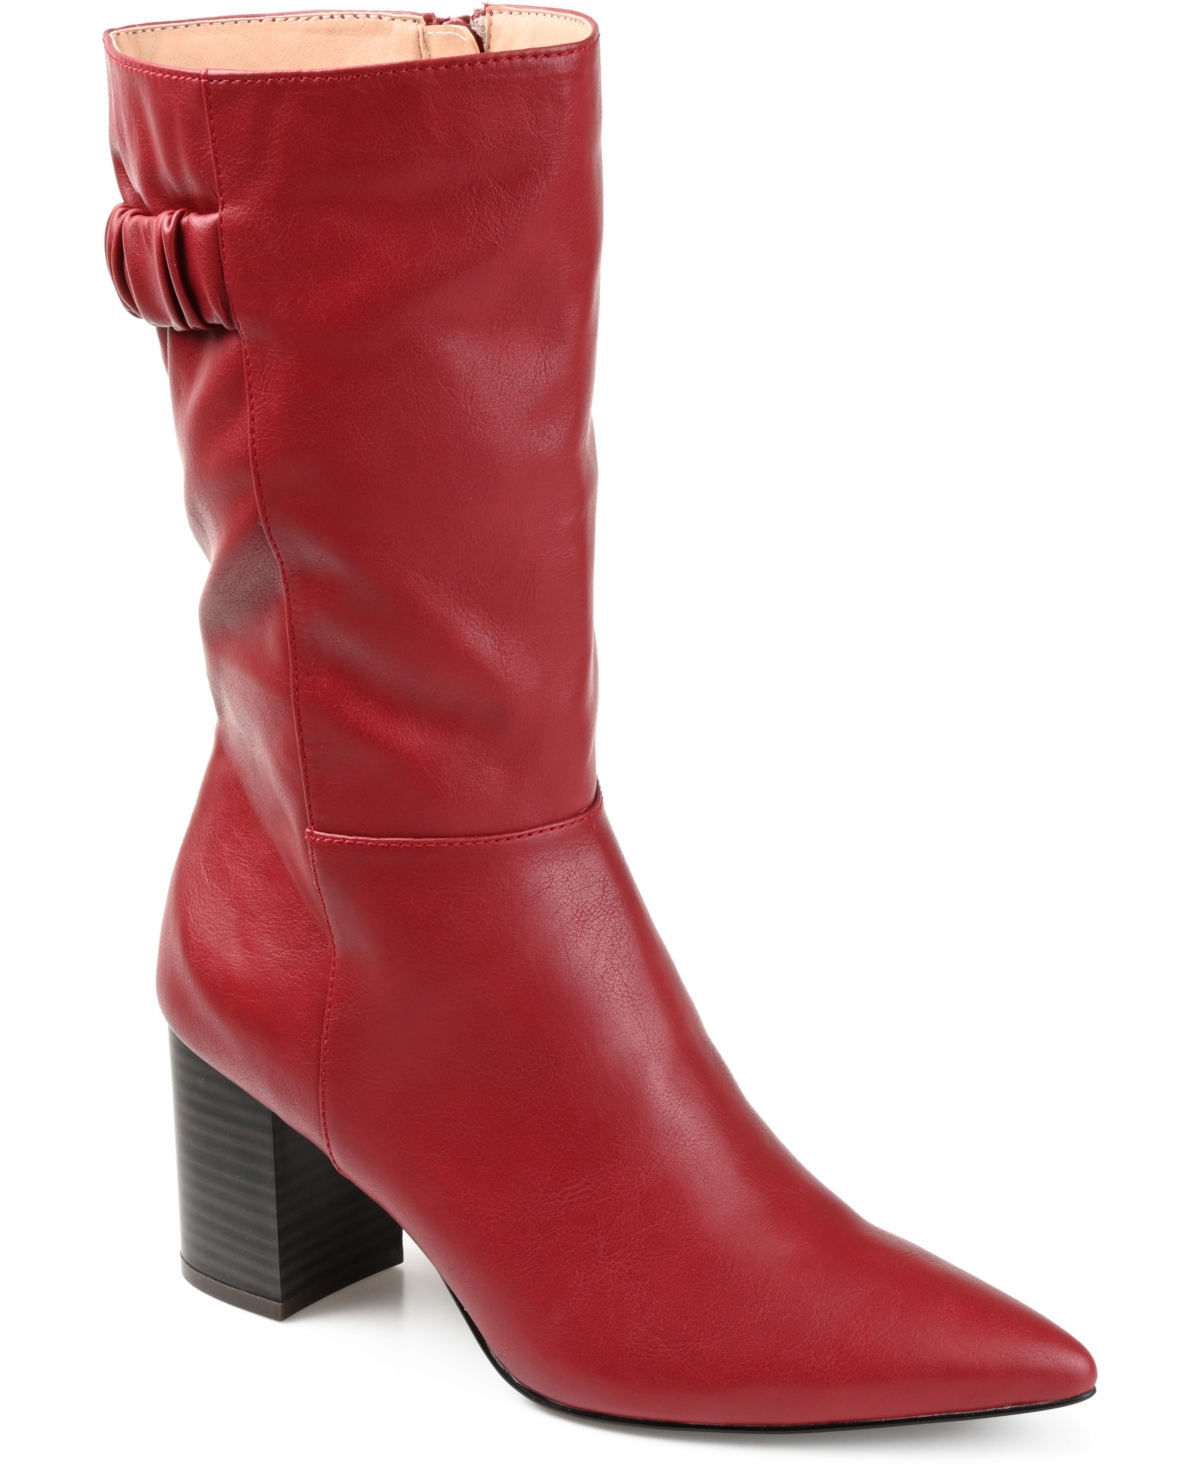 Vintage Shoes in Pictures | Shop Vintage Style Shoes Journee Collection Womens Wilo Wide Calf Boots - Red $99.99 AT vintagedancer.com